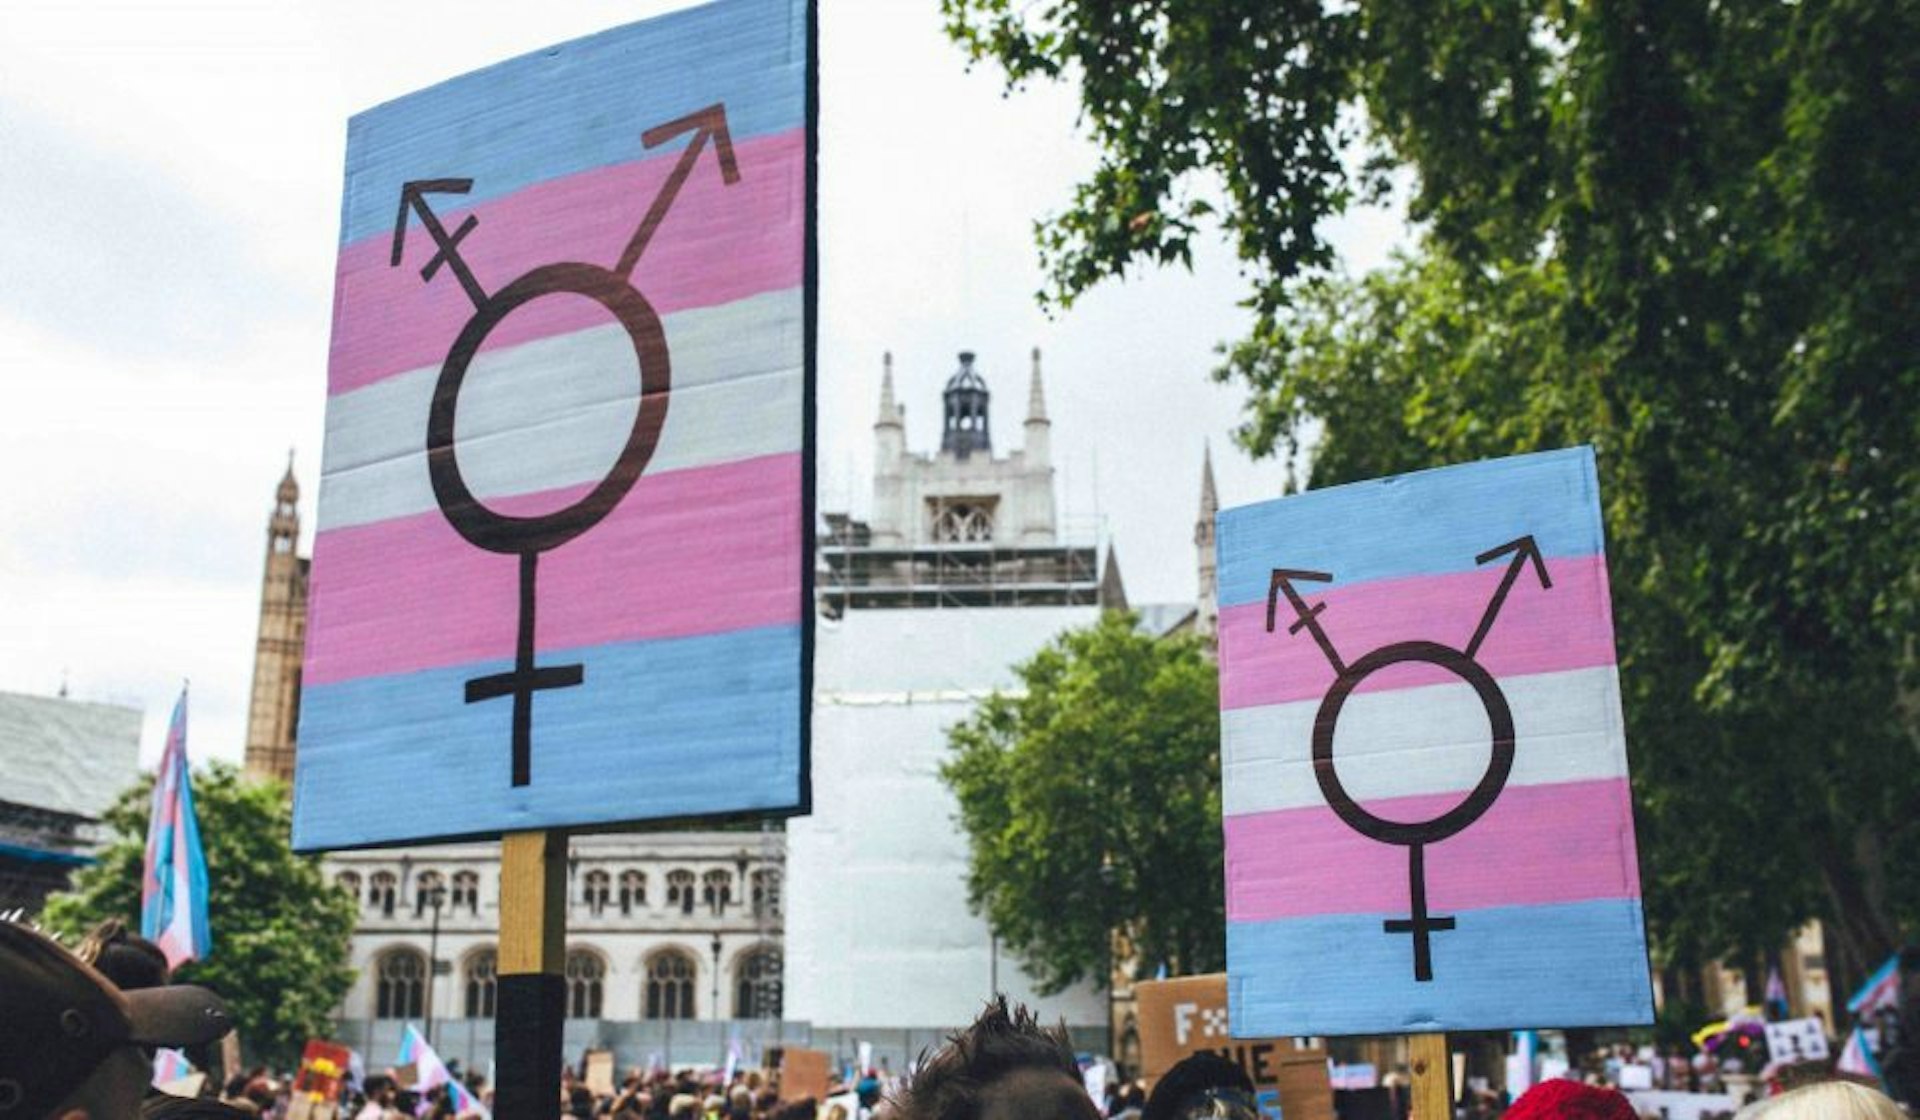 Legal recognition won‘t protect non-binary people